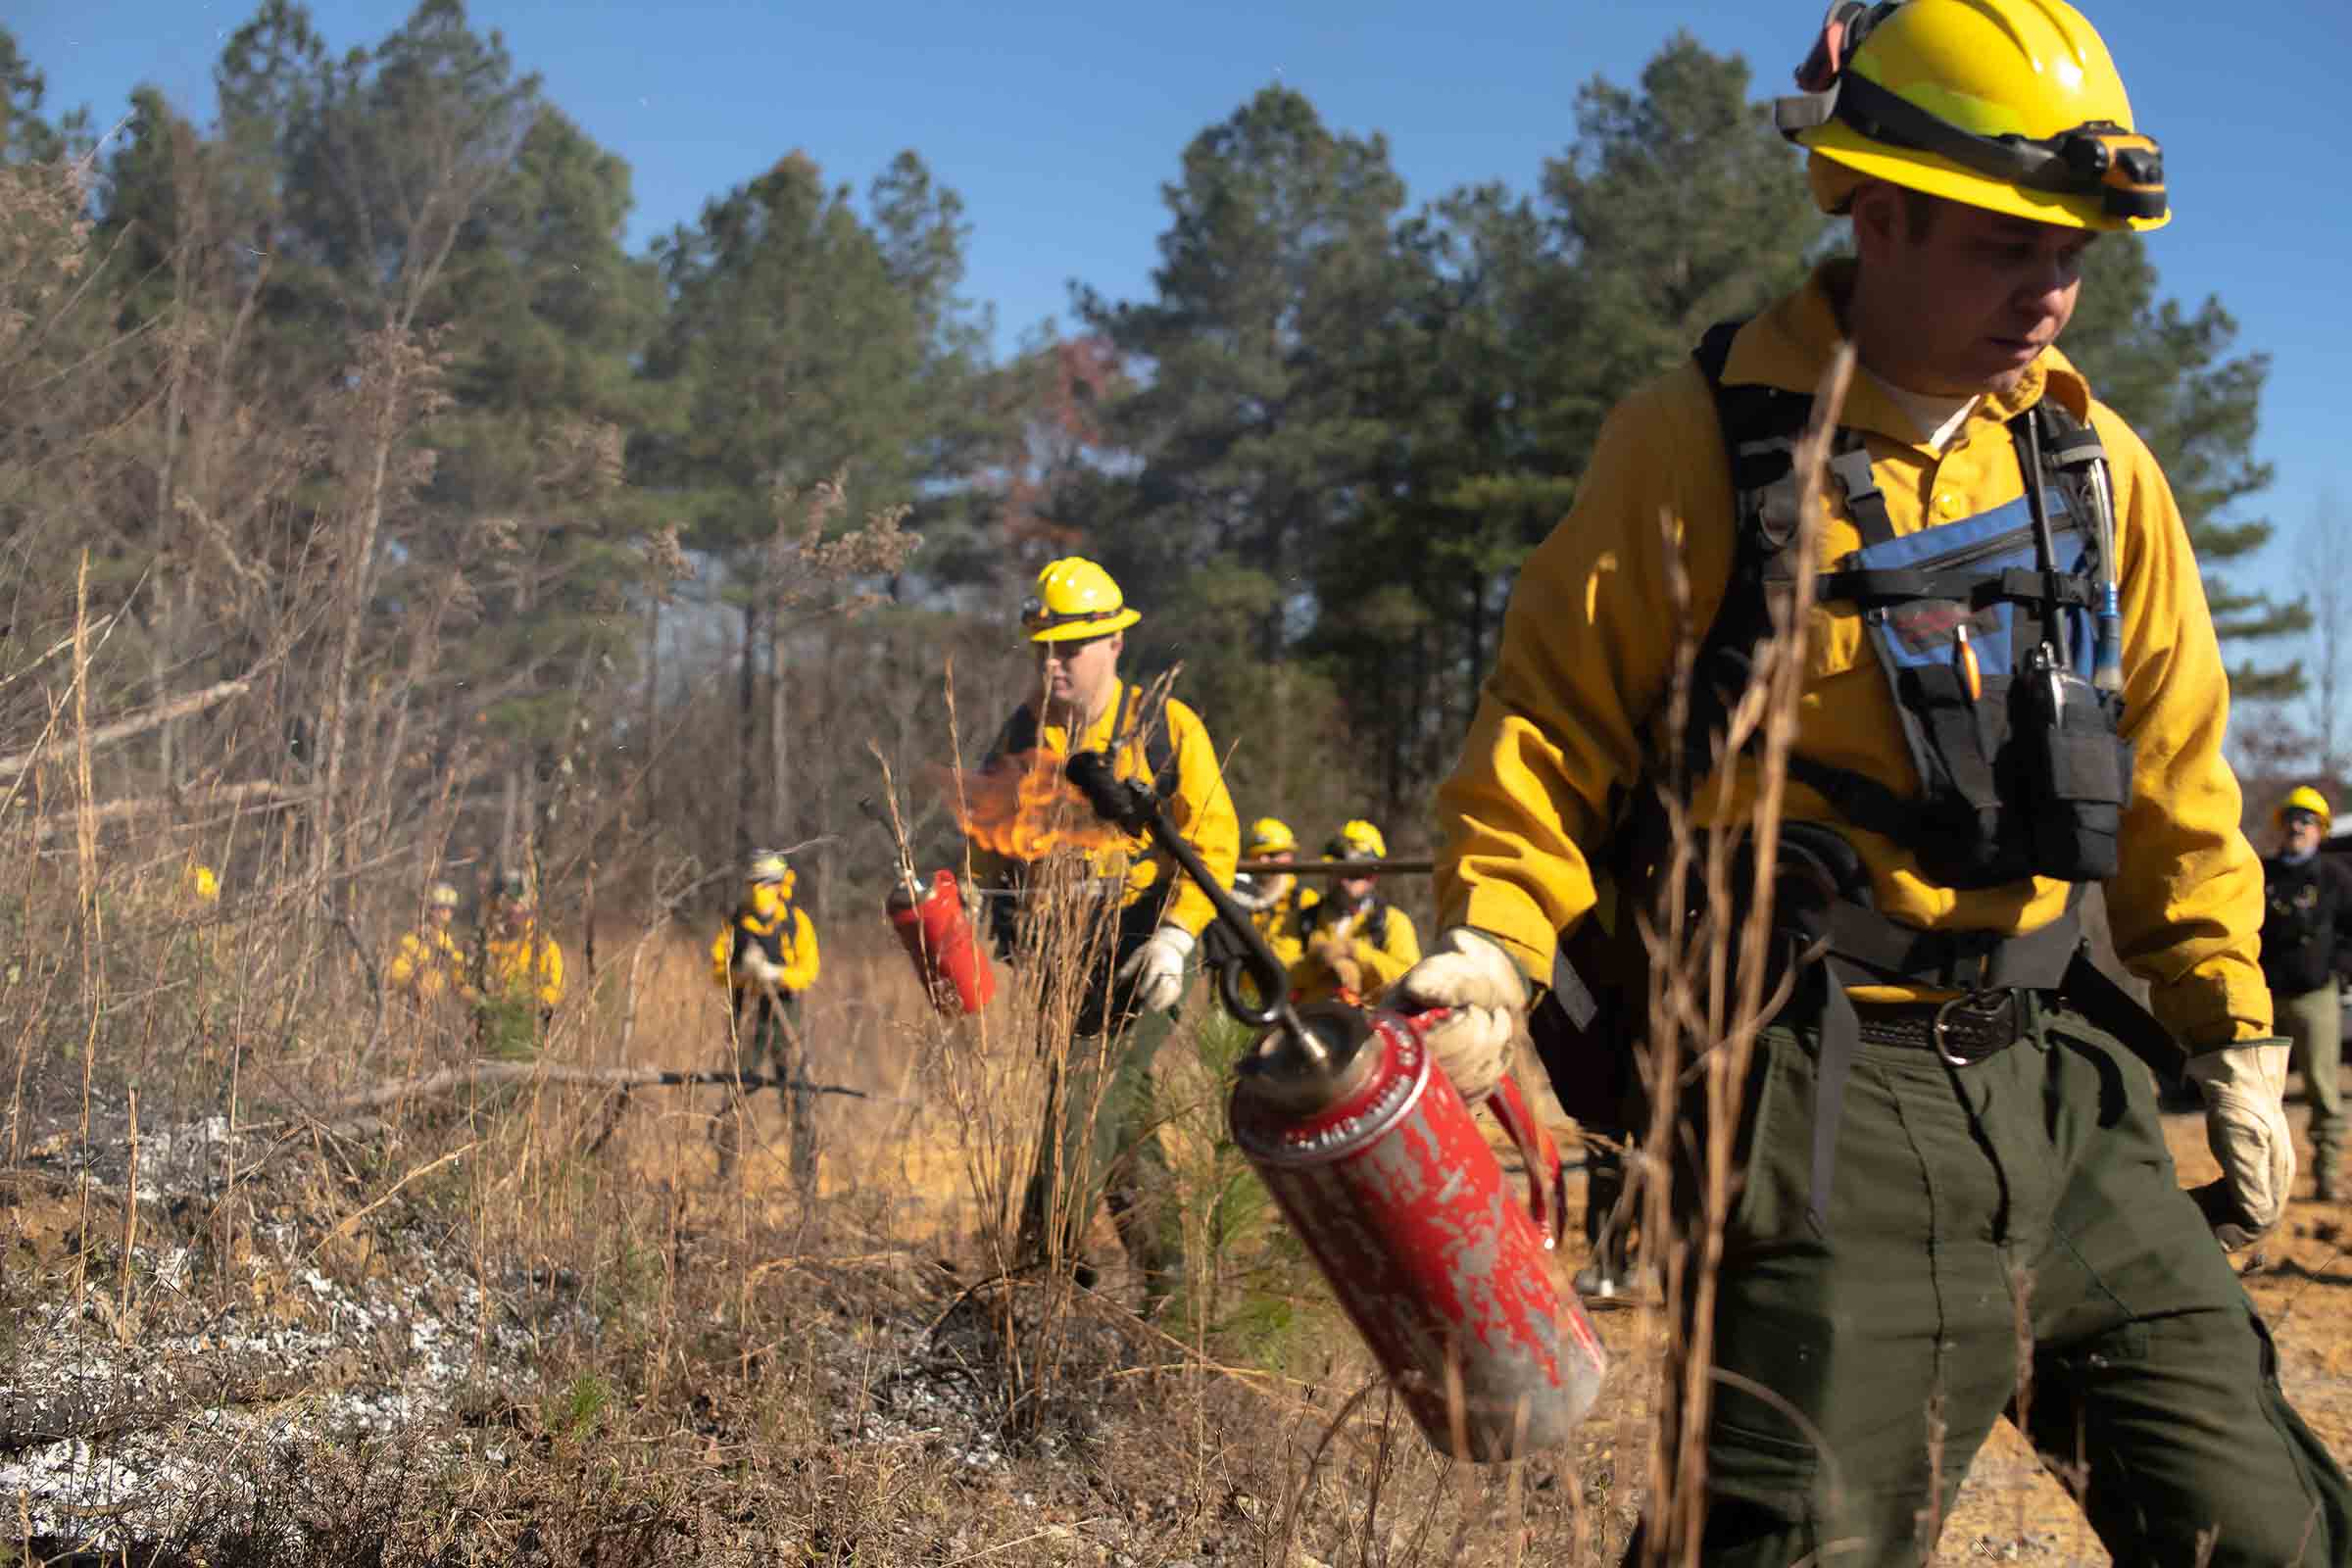 Prescribed fire crew safely starting the fire at Savage Gulf